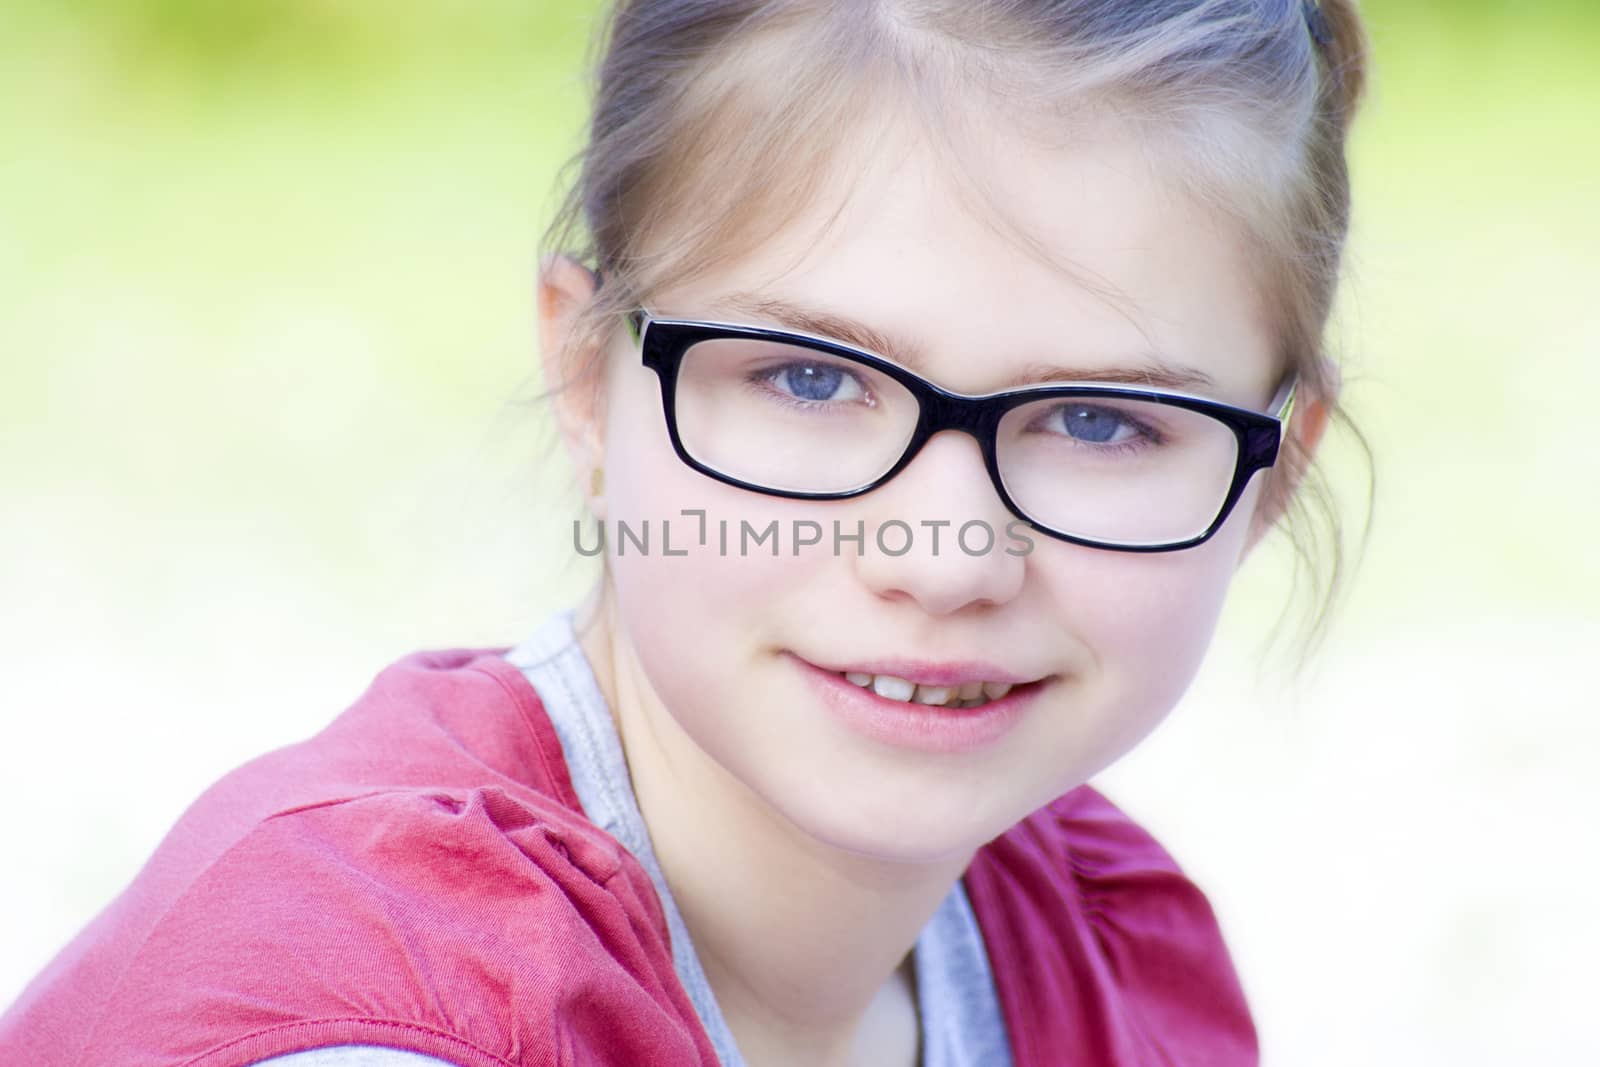 portrait of young girl with glasses